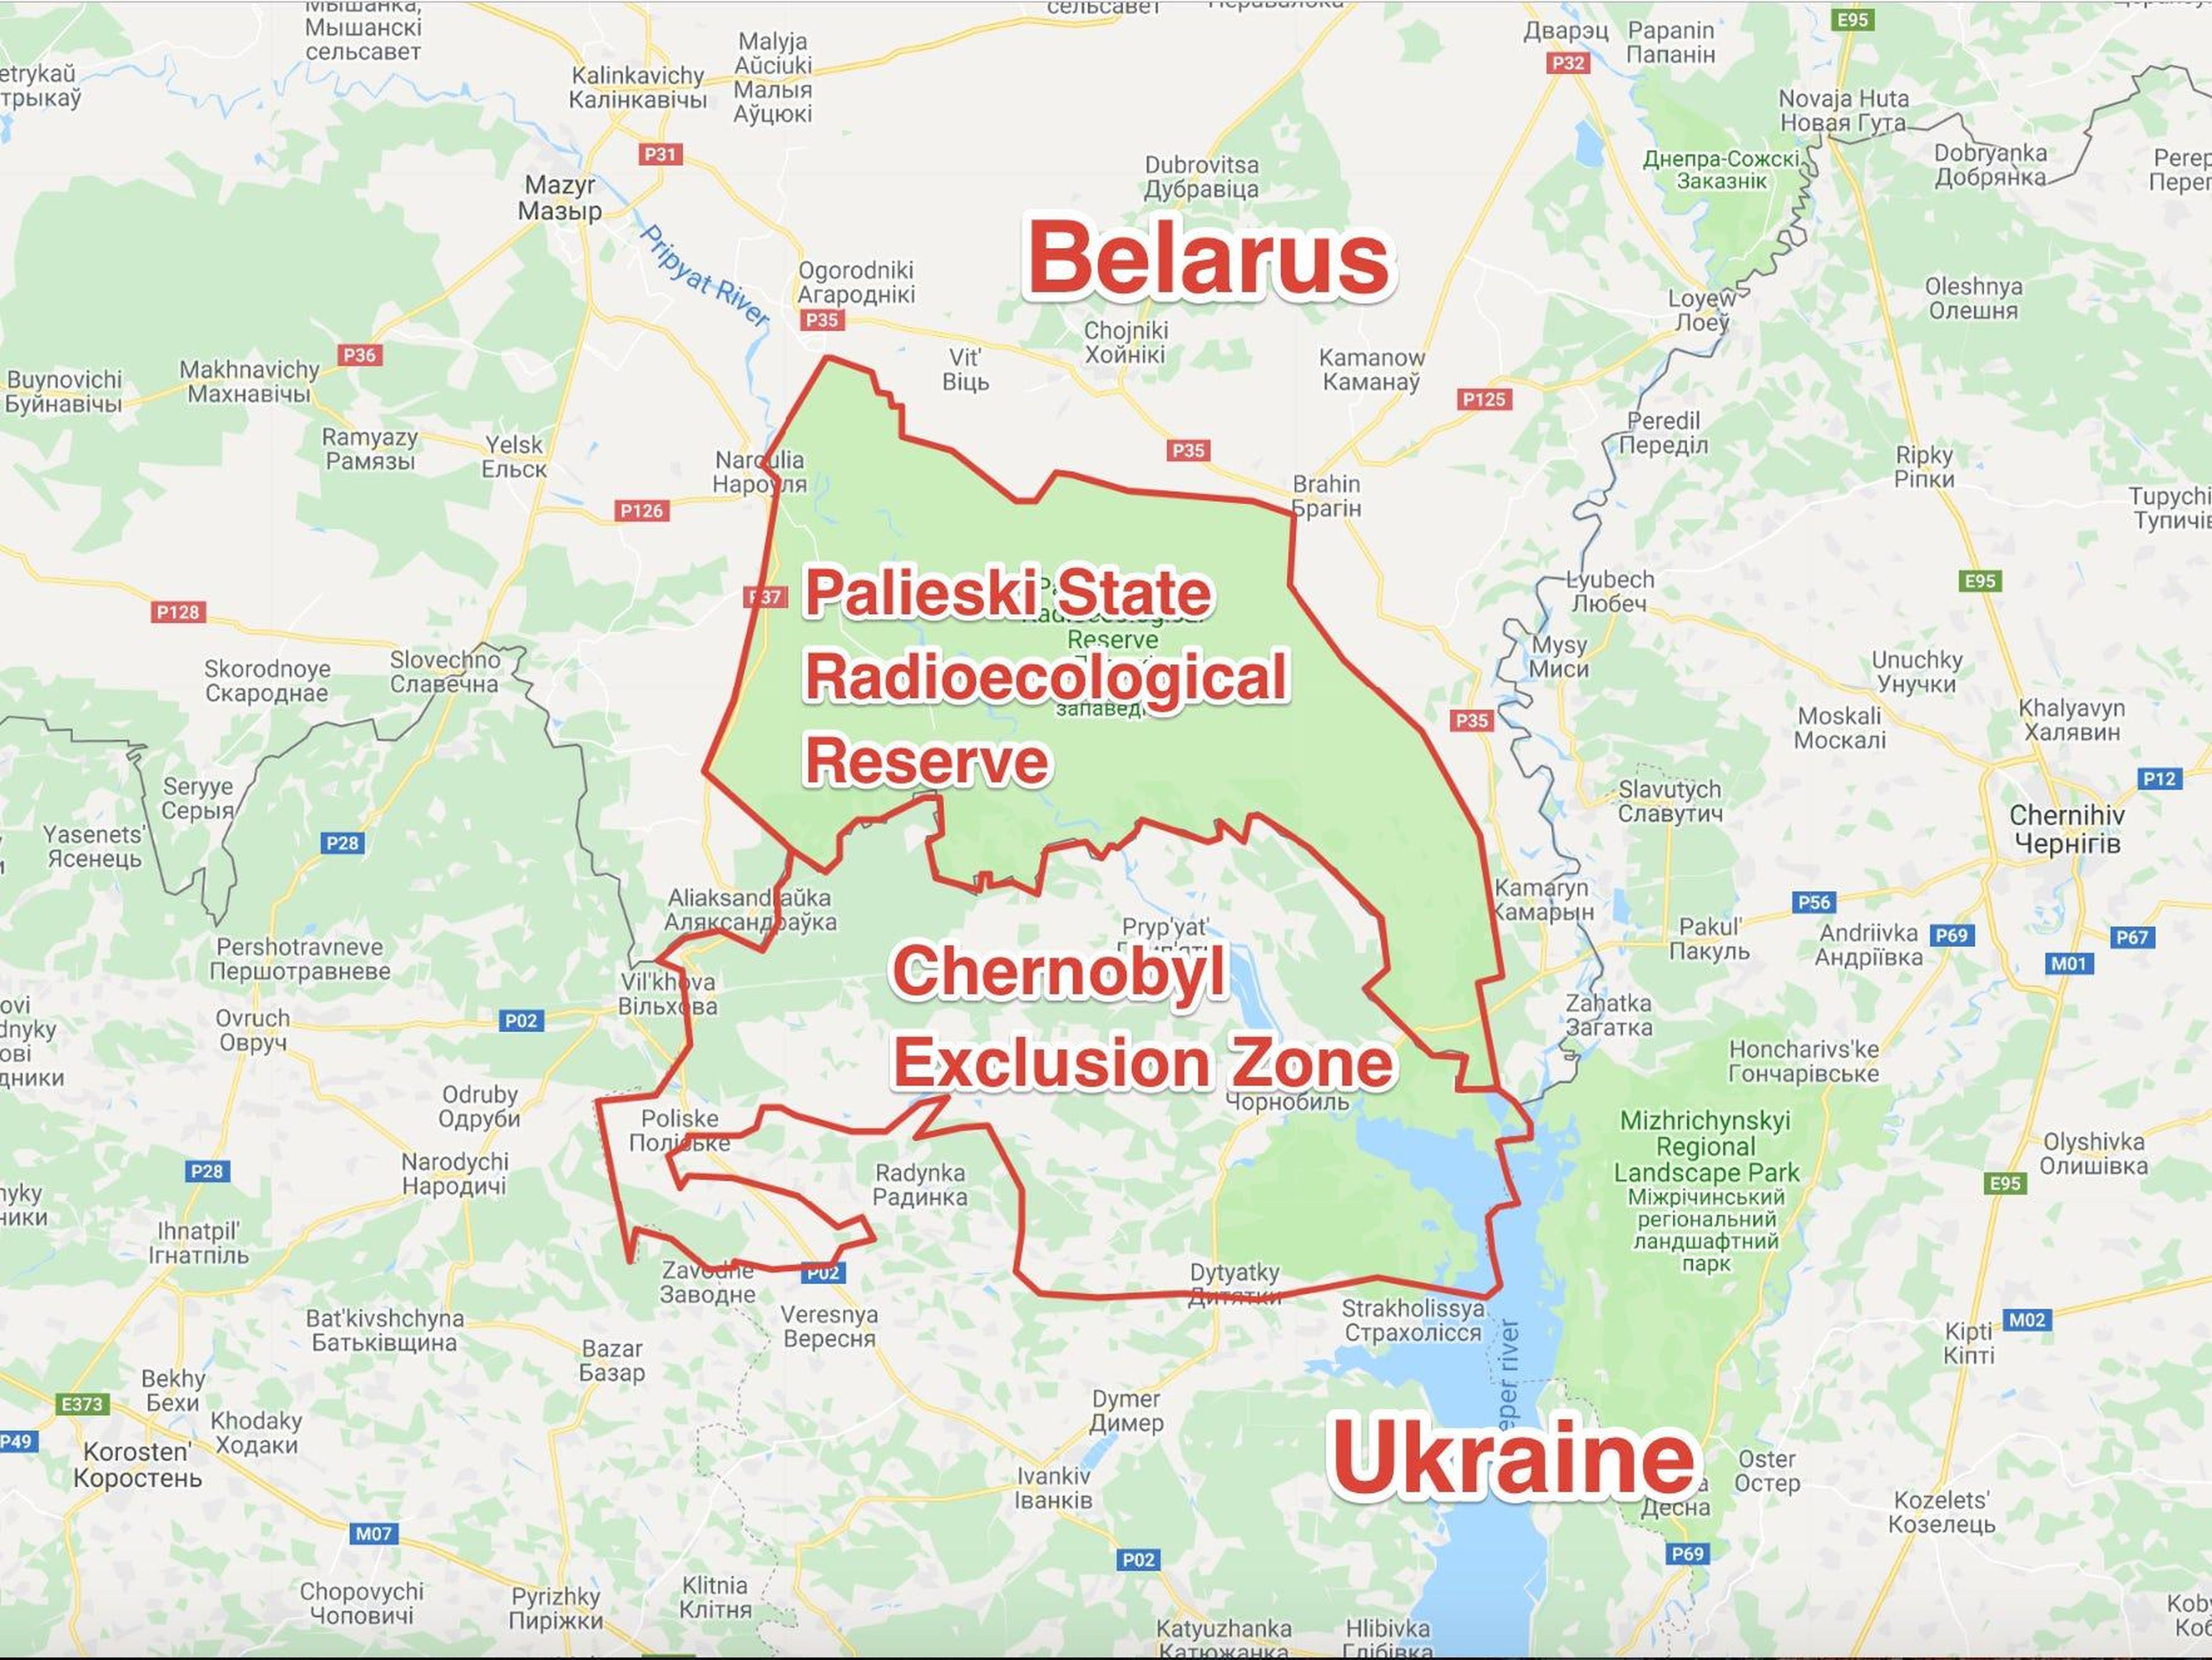 ... which adjoins the exclusion zone in neighboring Belarus, known as the Palieski State Radioecological Reserve. Though the explosion took place in Ukraine, much of the radiation from the Chernobyl disaster was blown north to